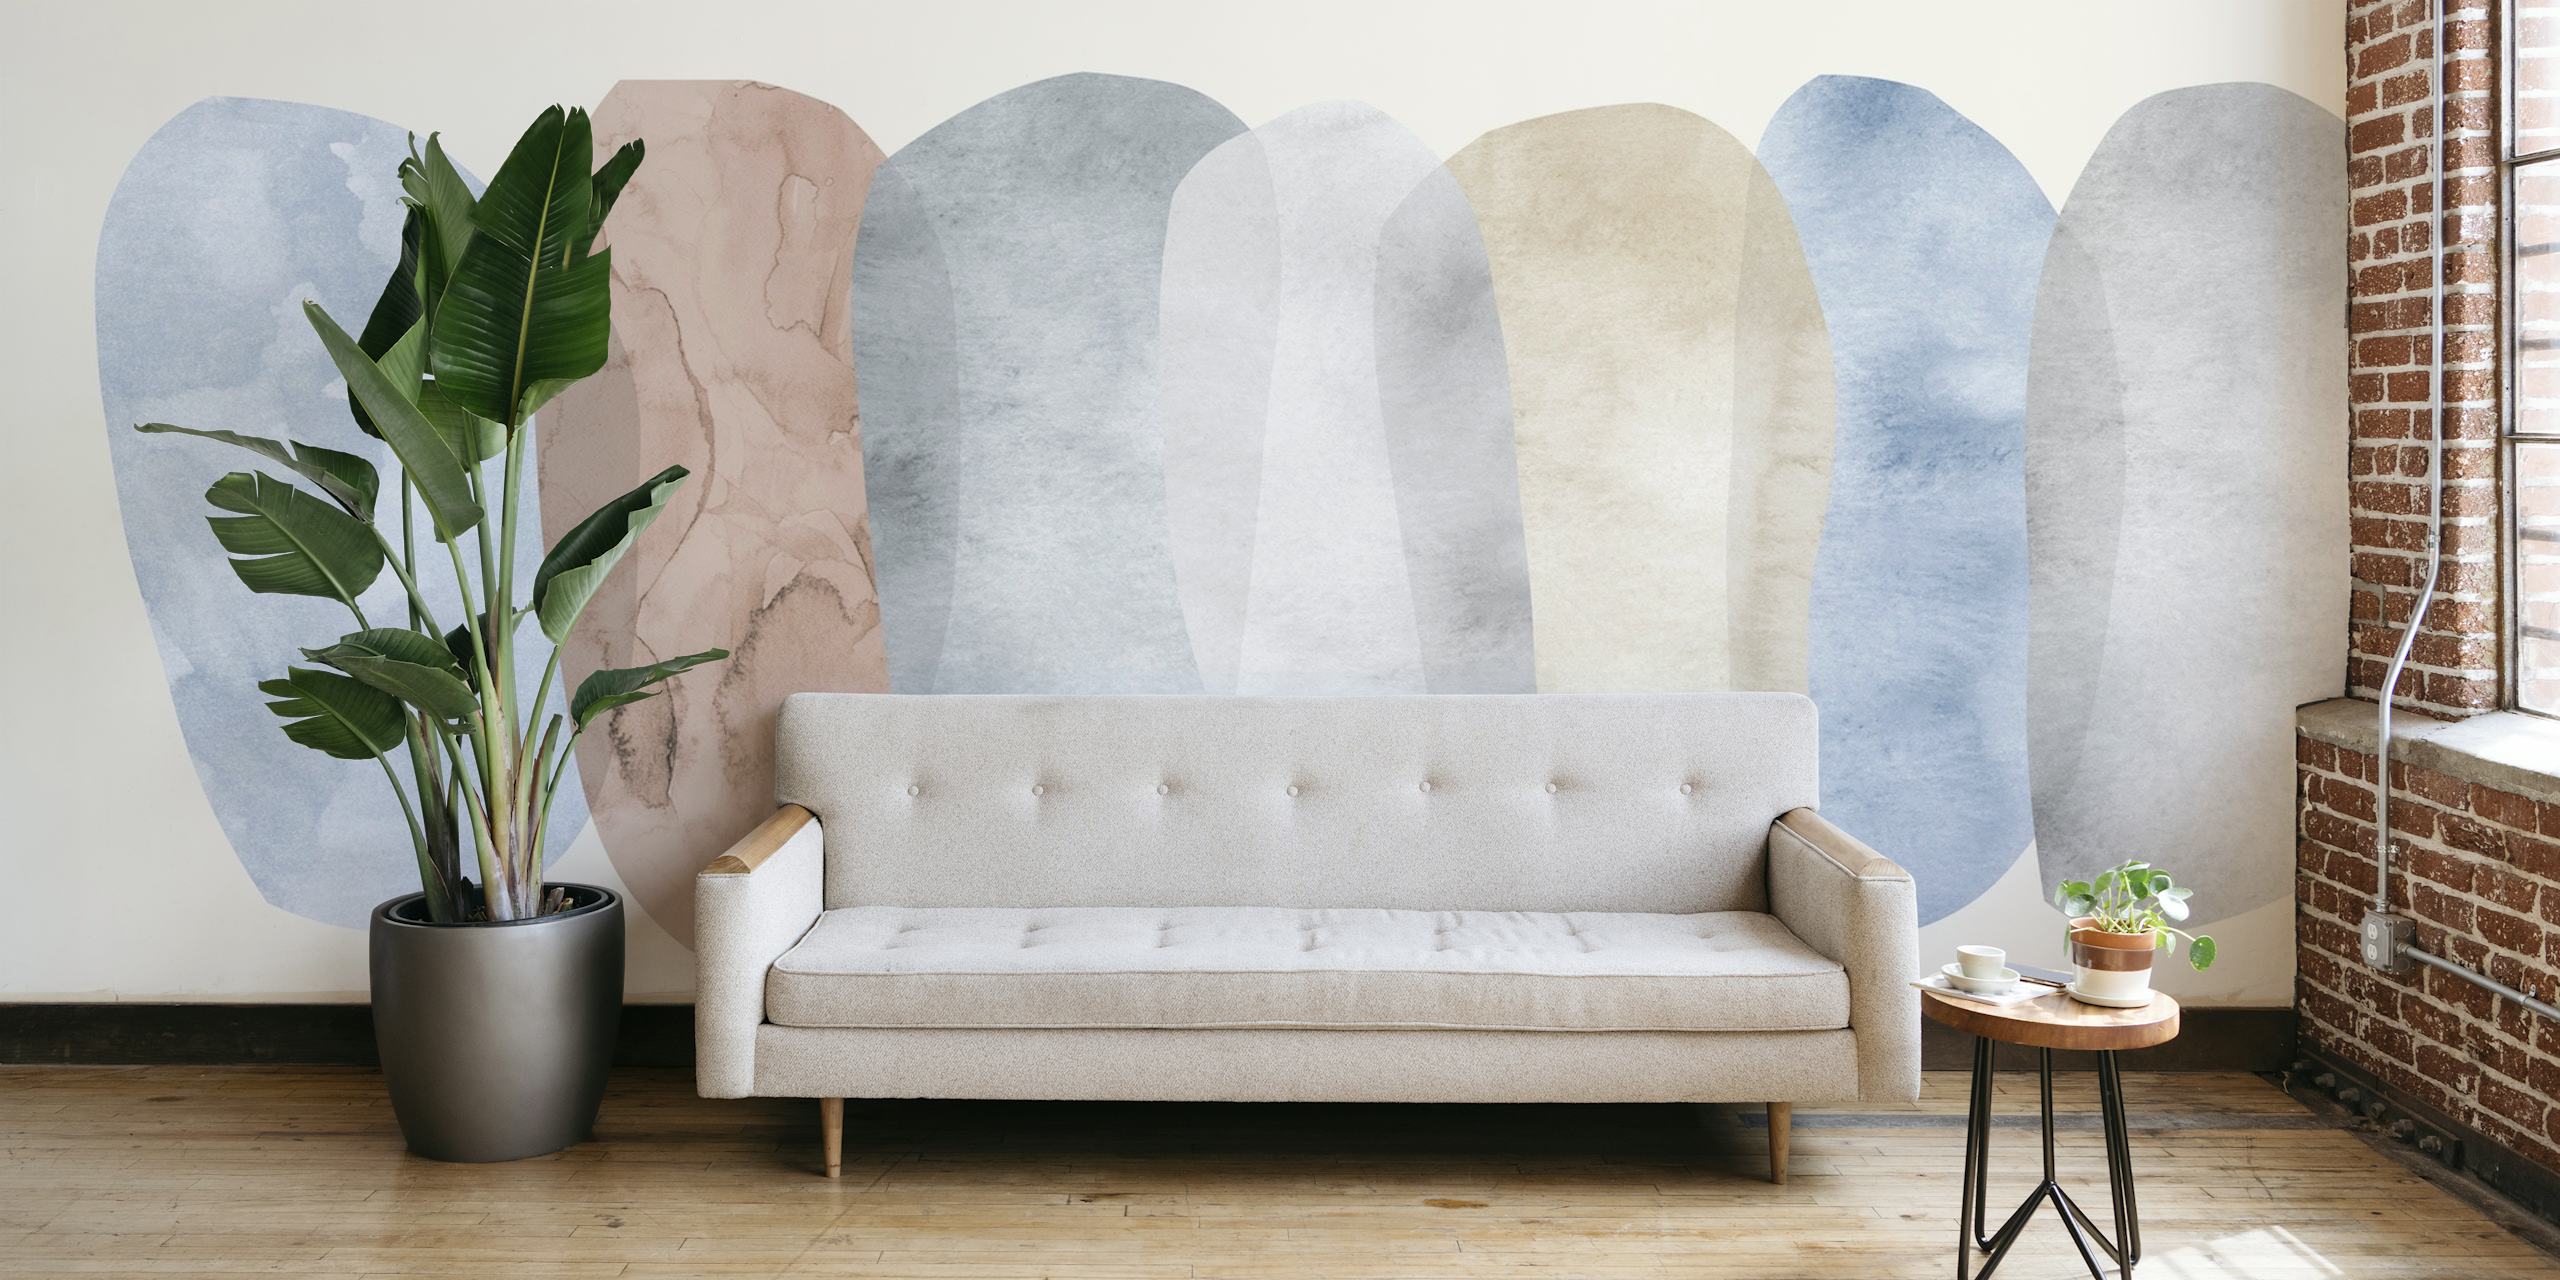 Pastel abstract collage wall mural with calming blue and neutral tones